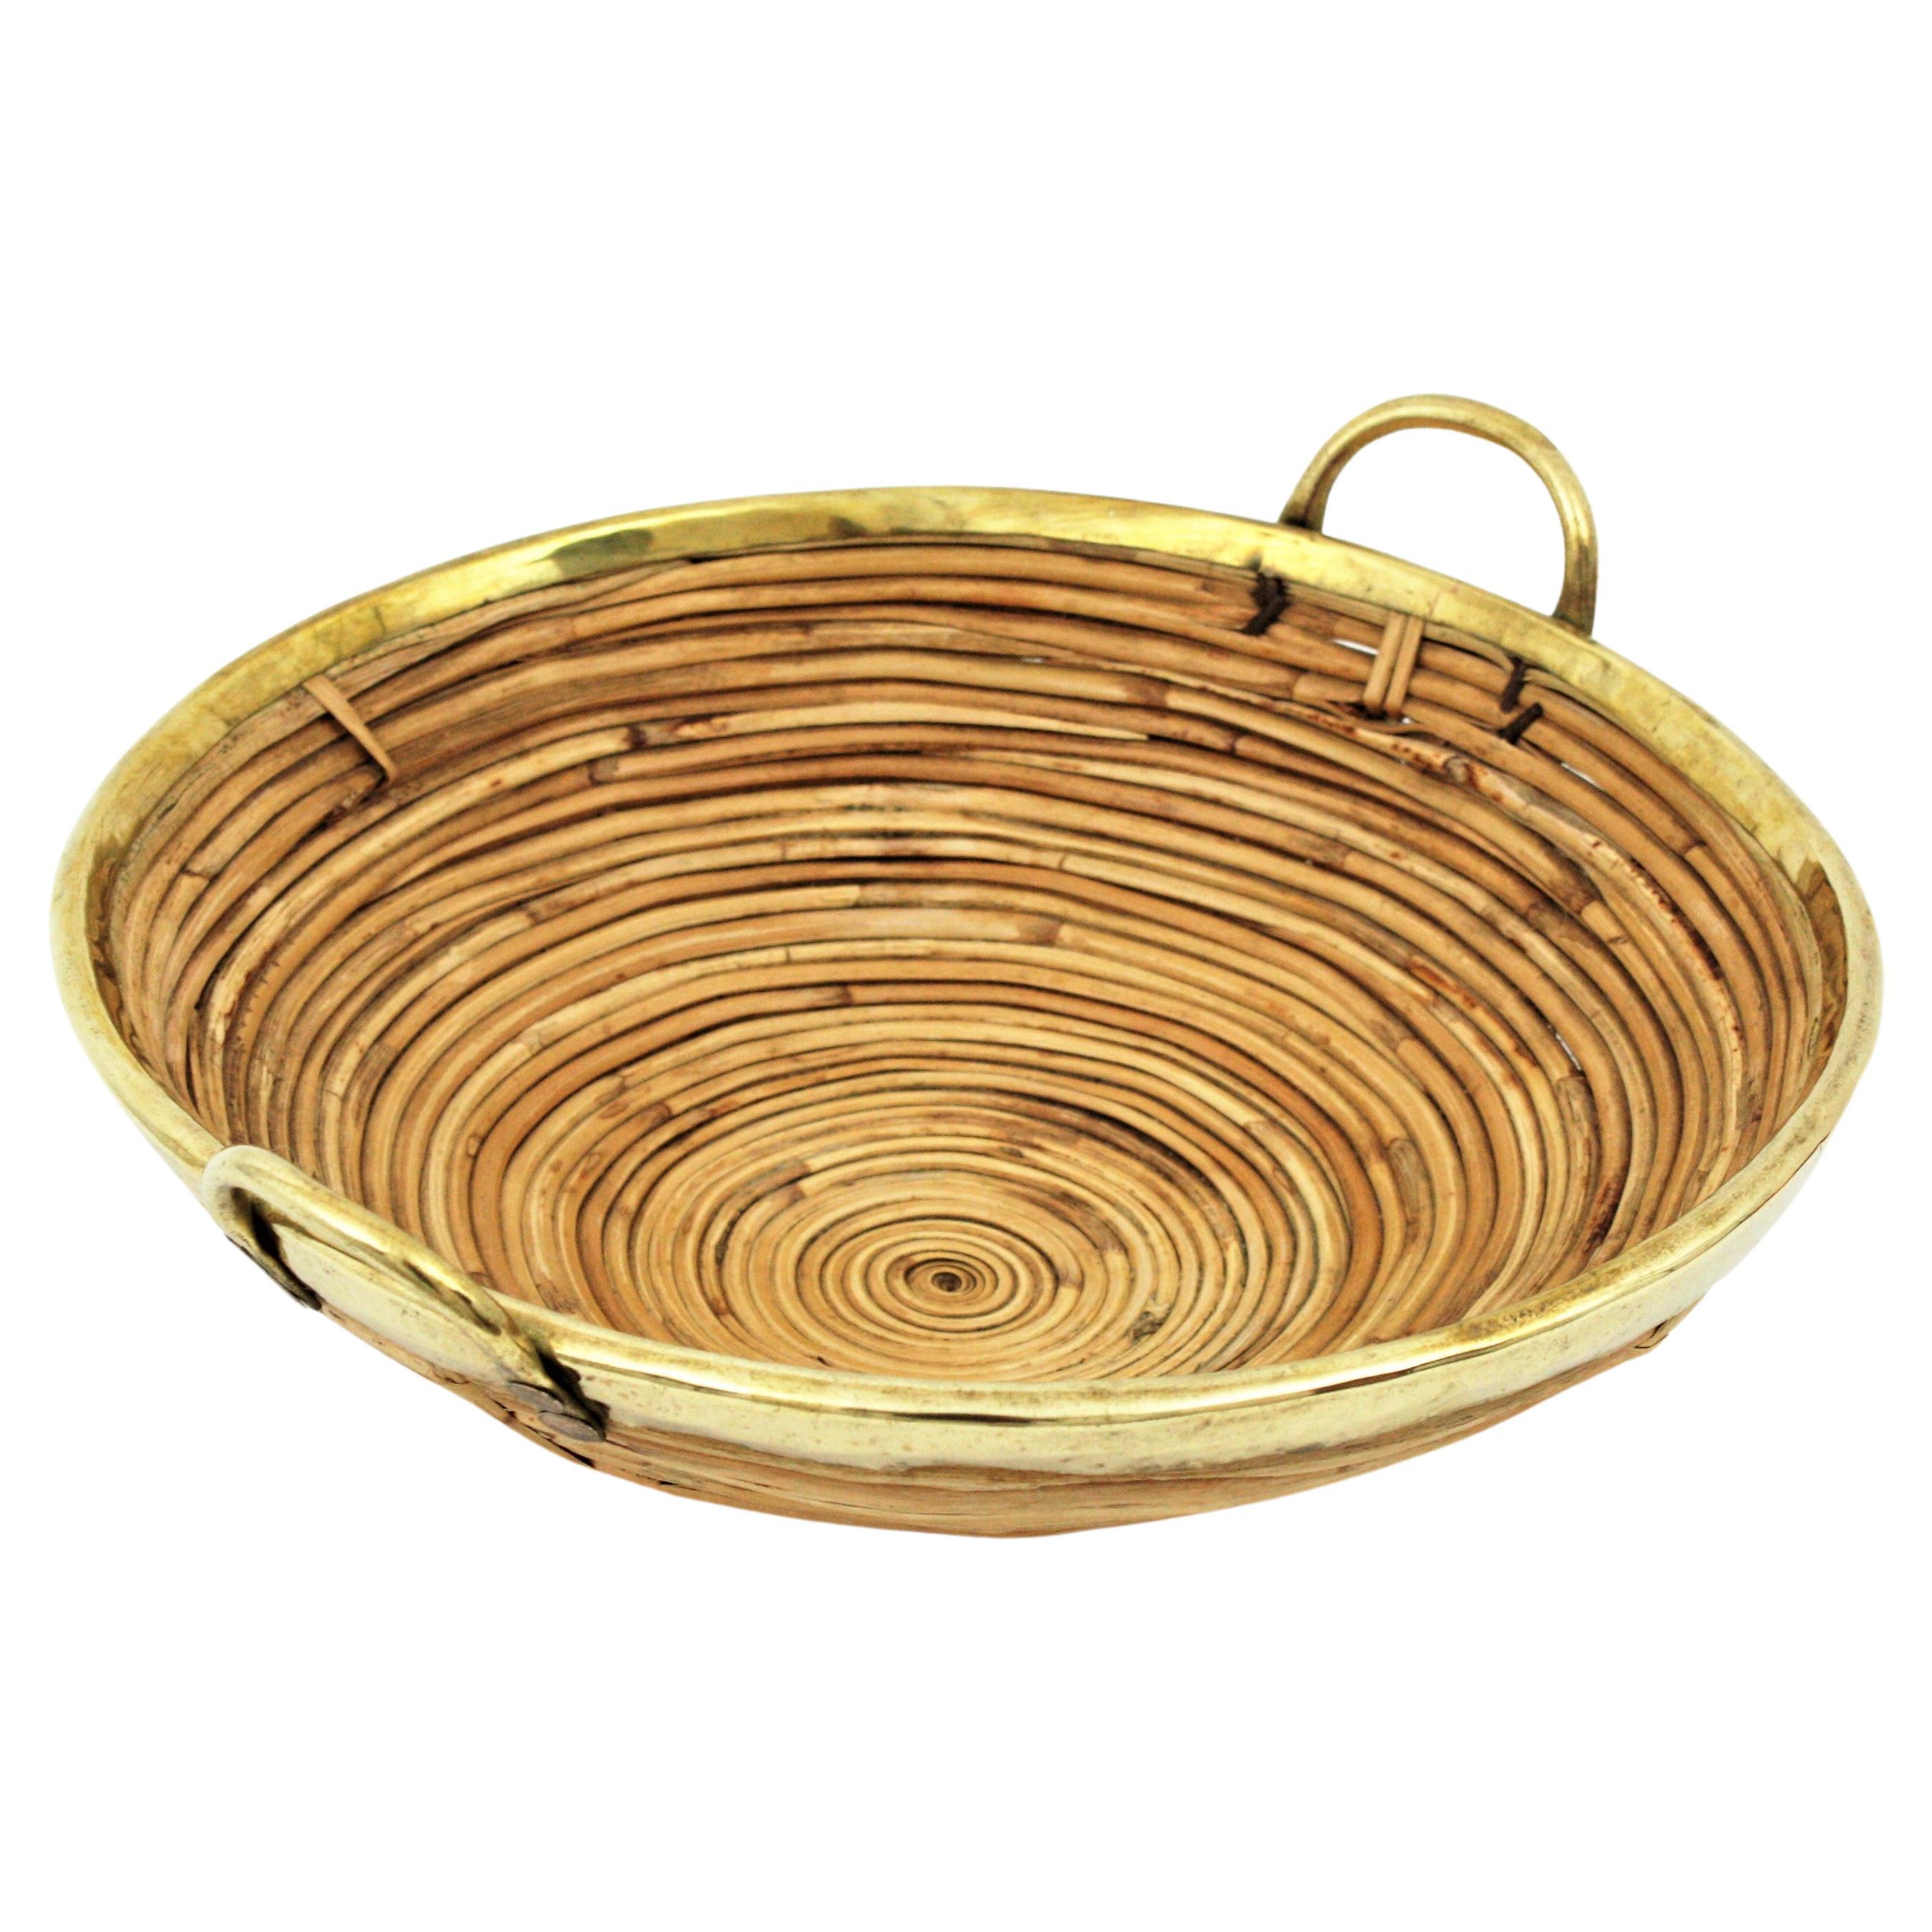 Rattan and Brass Italian Centerpiece Basket with Handles, 1970s For Sale